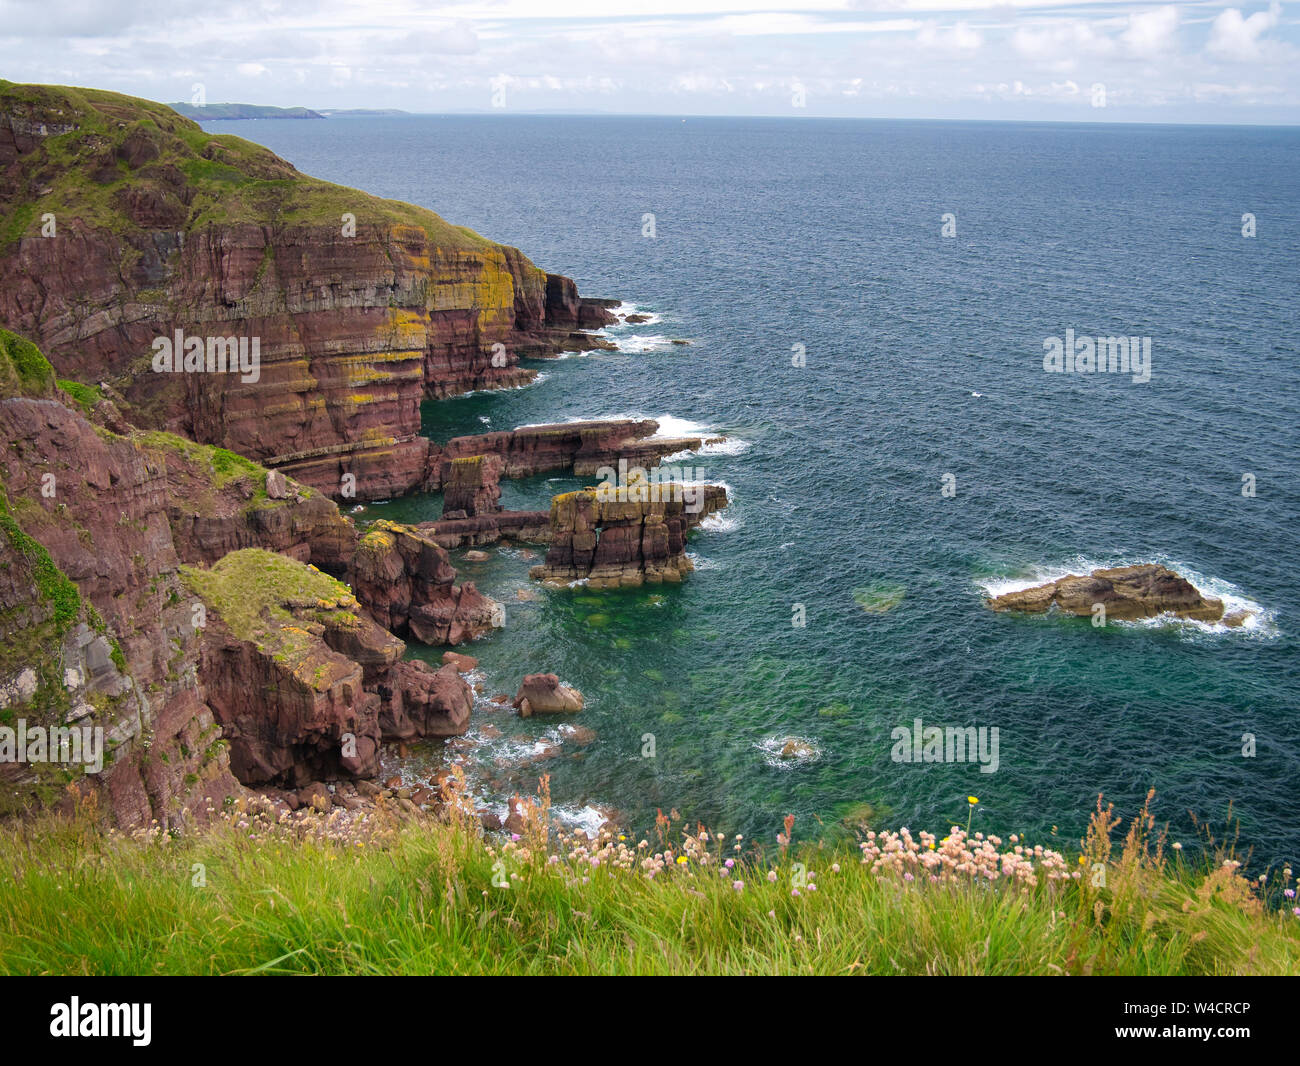 Heavily stratified sandstone sedimentary coastal cliffs in Pembrokeshire, South Wales, UK, as viewed from the Coast Path Stock Photo